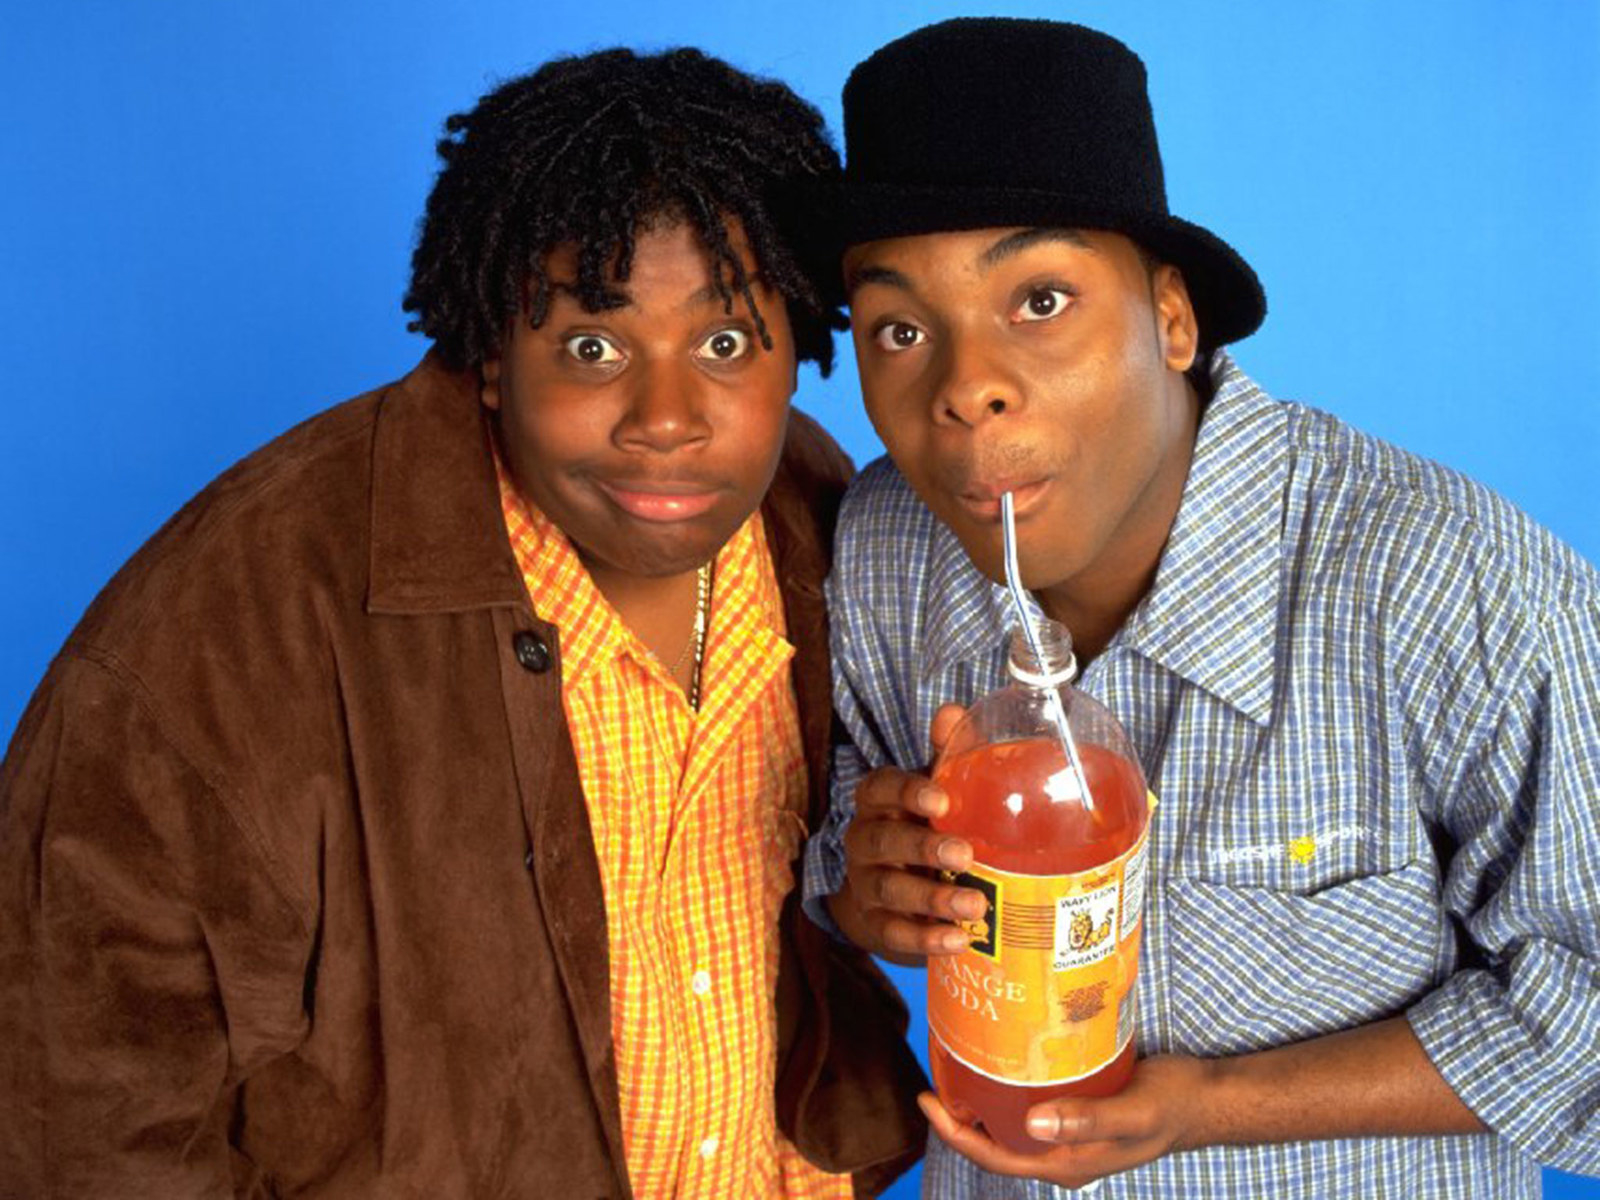 Two people posing with soda